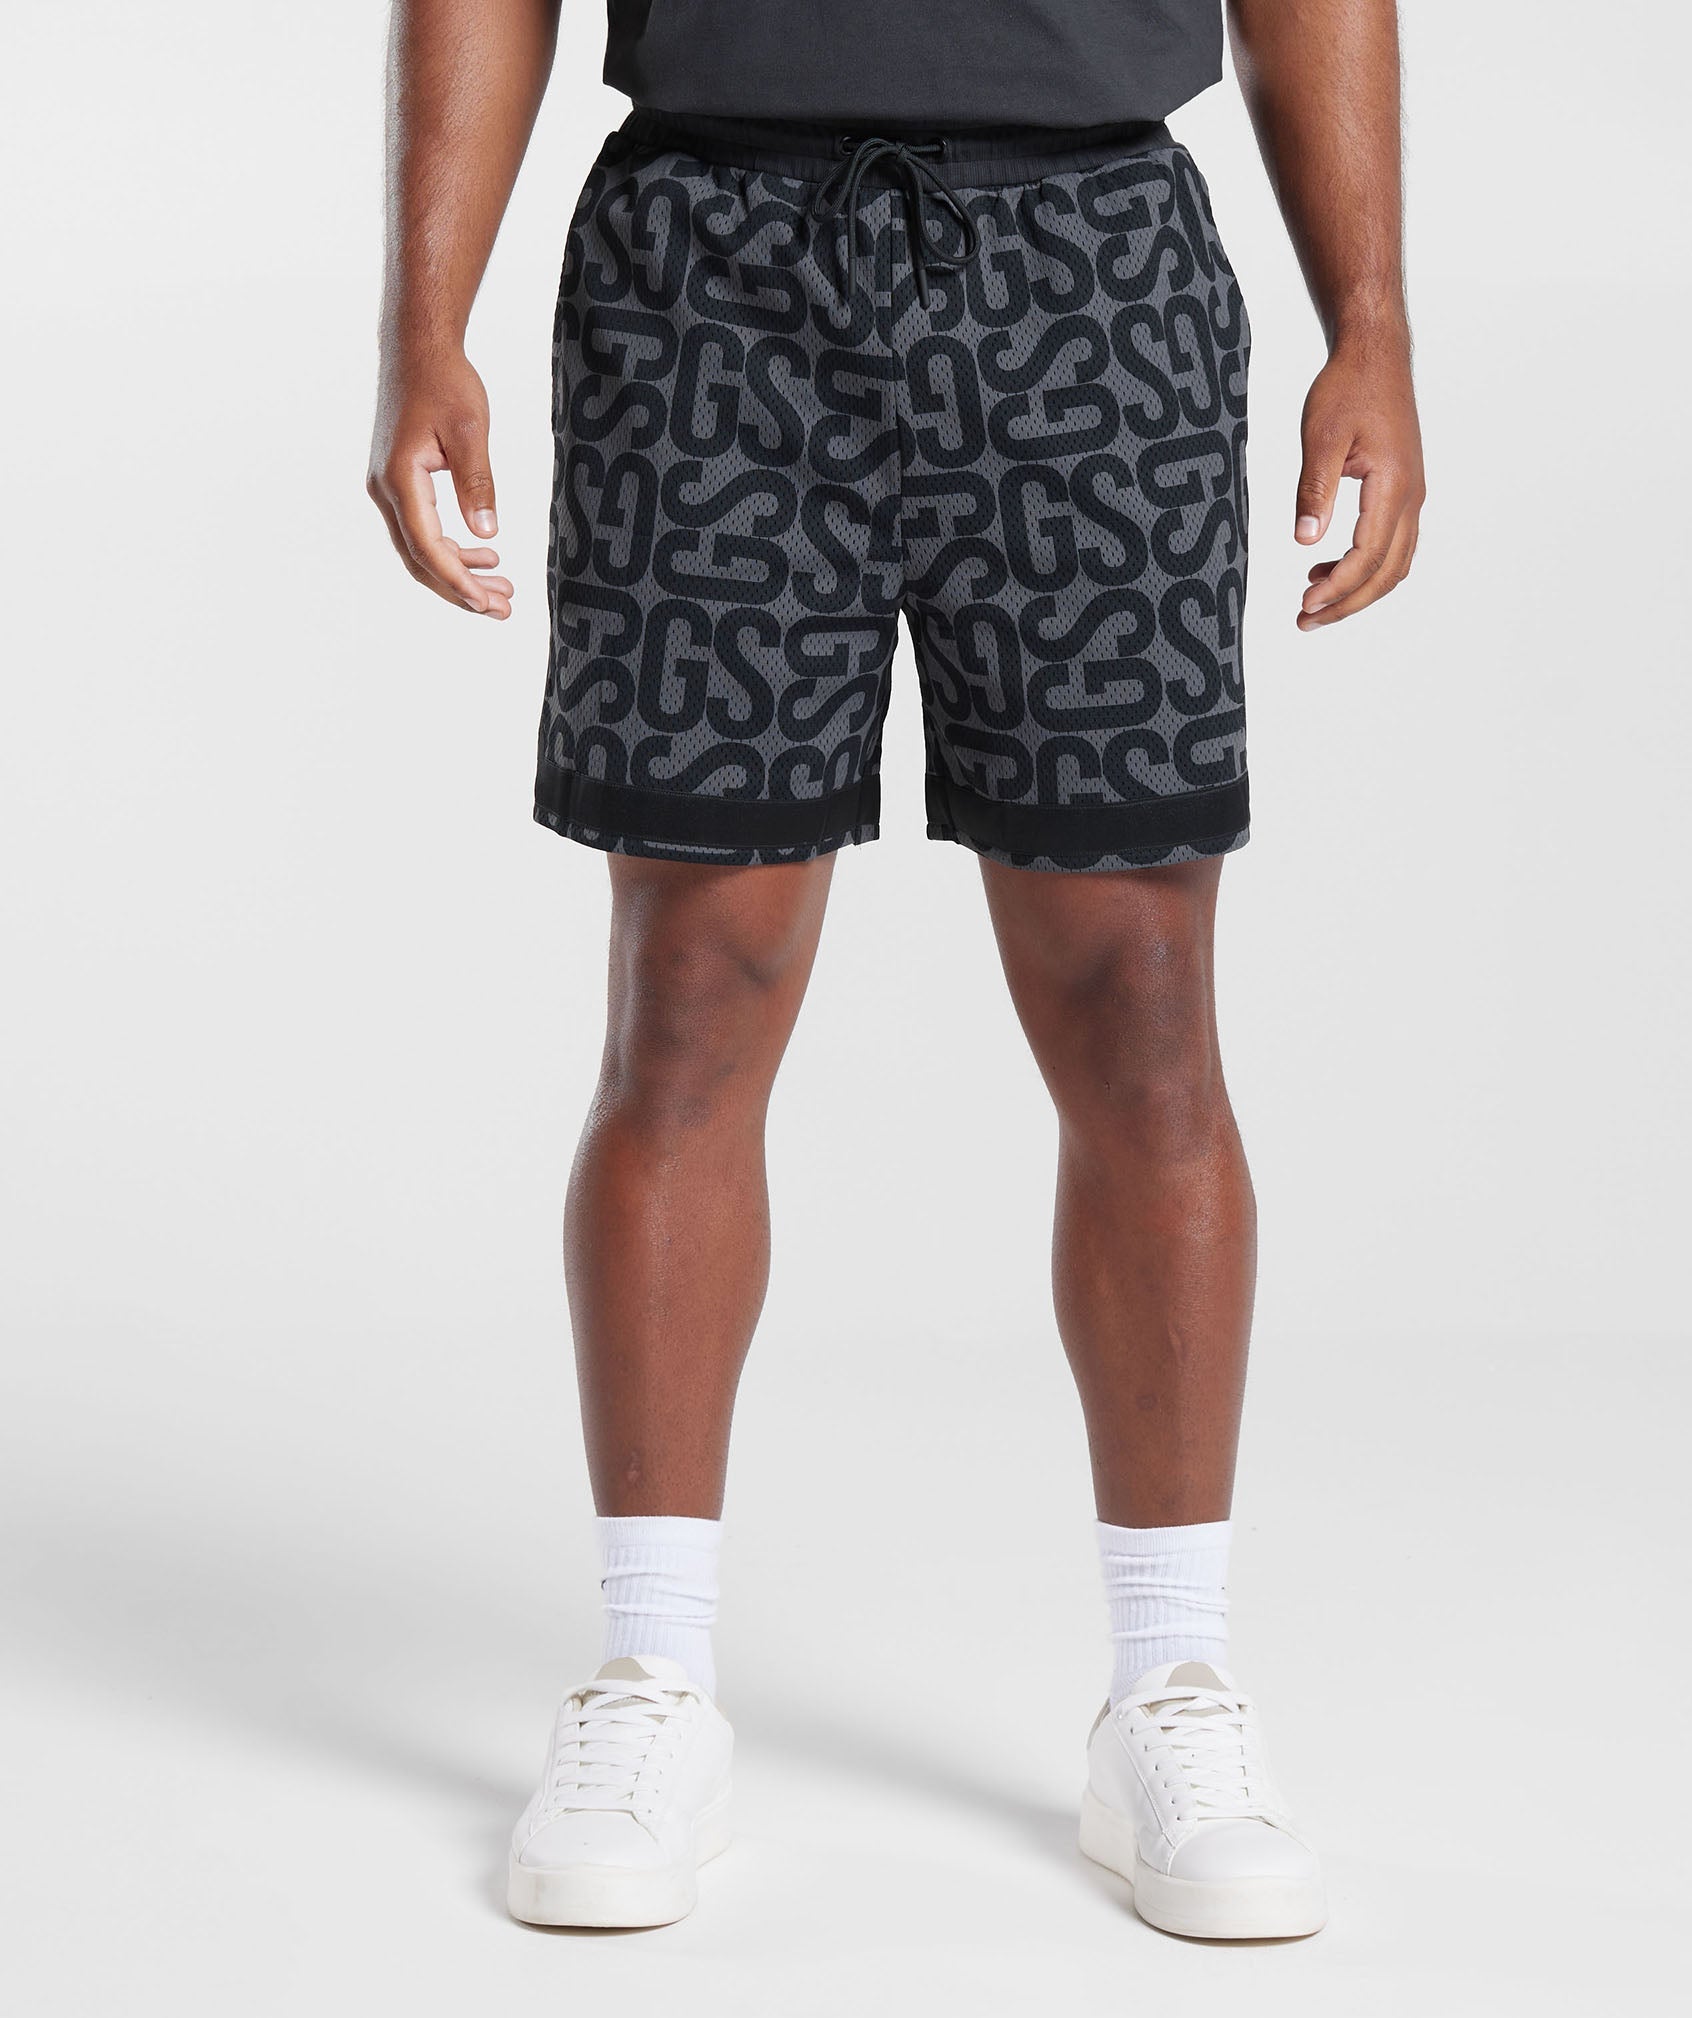 Rest Day Shorts in Black/Onyx Grey - view 1